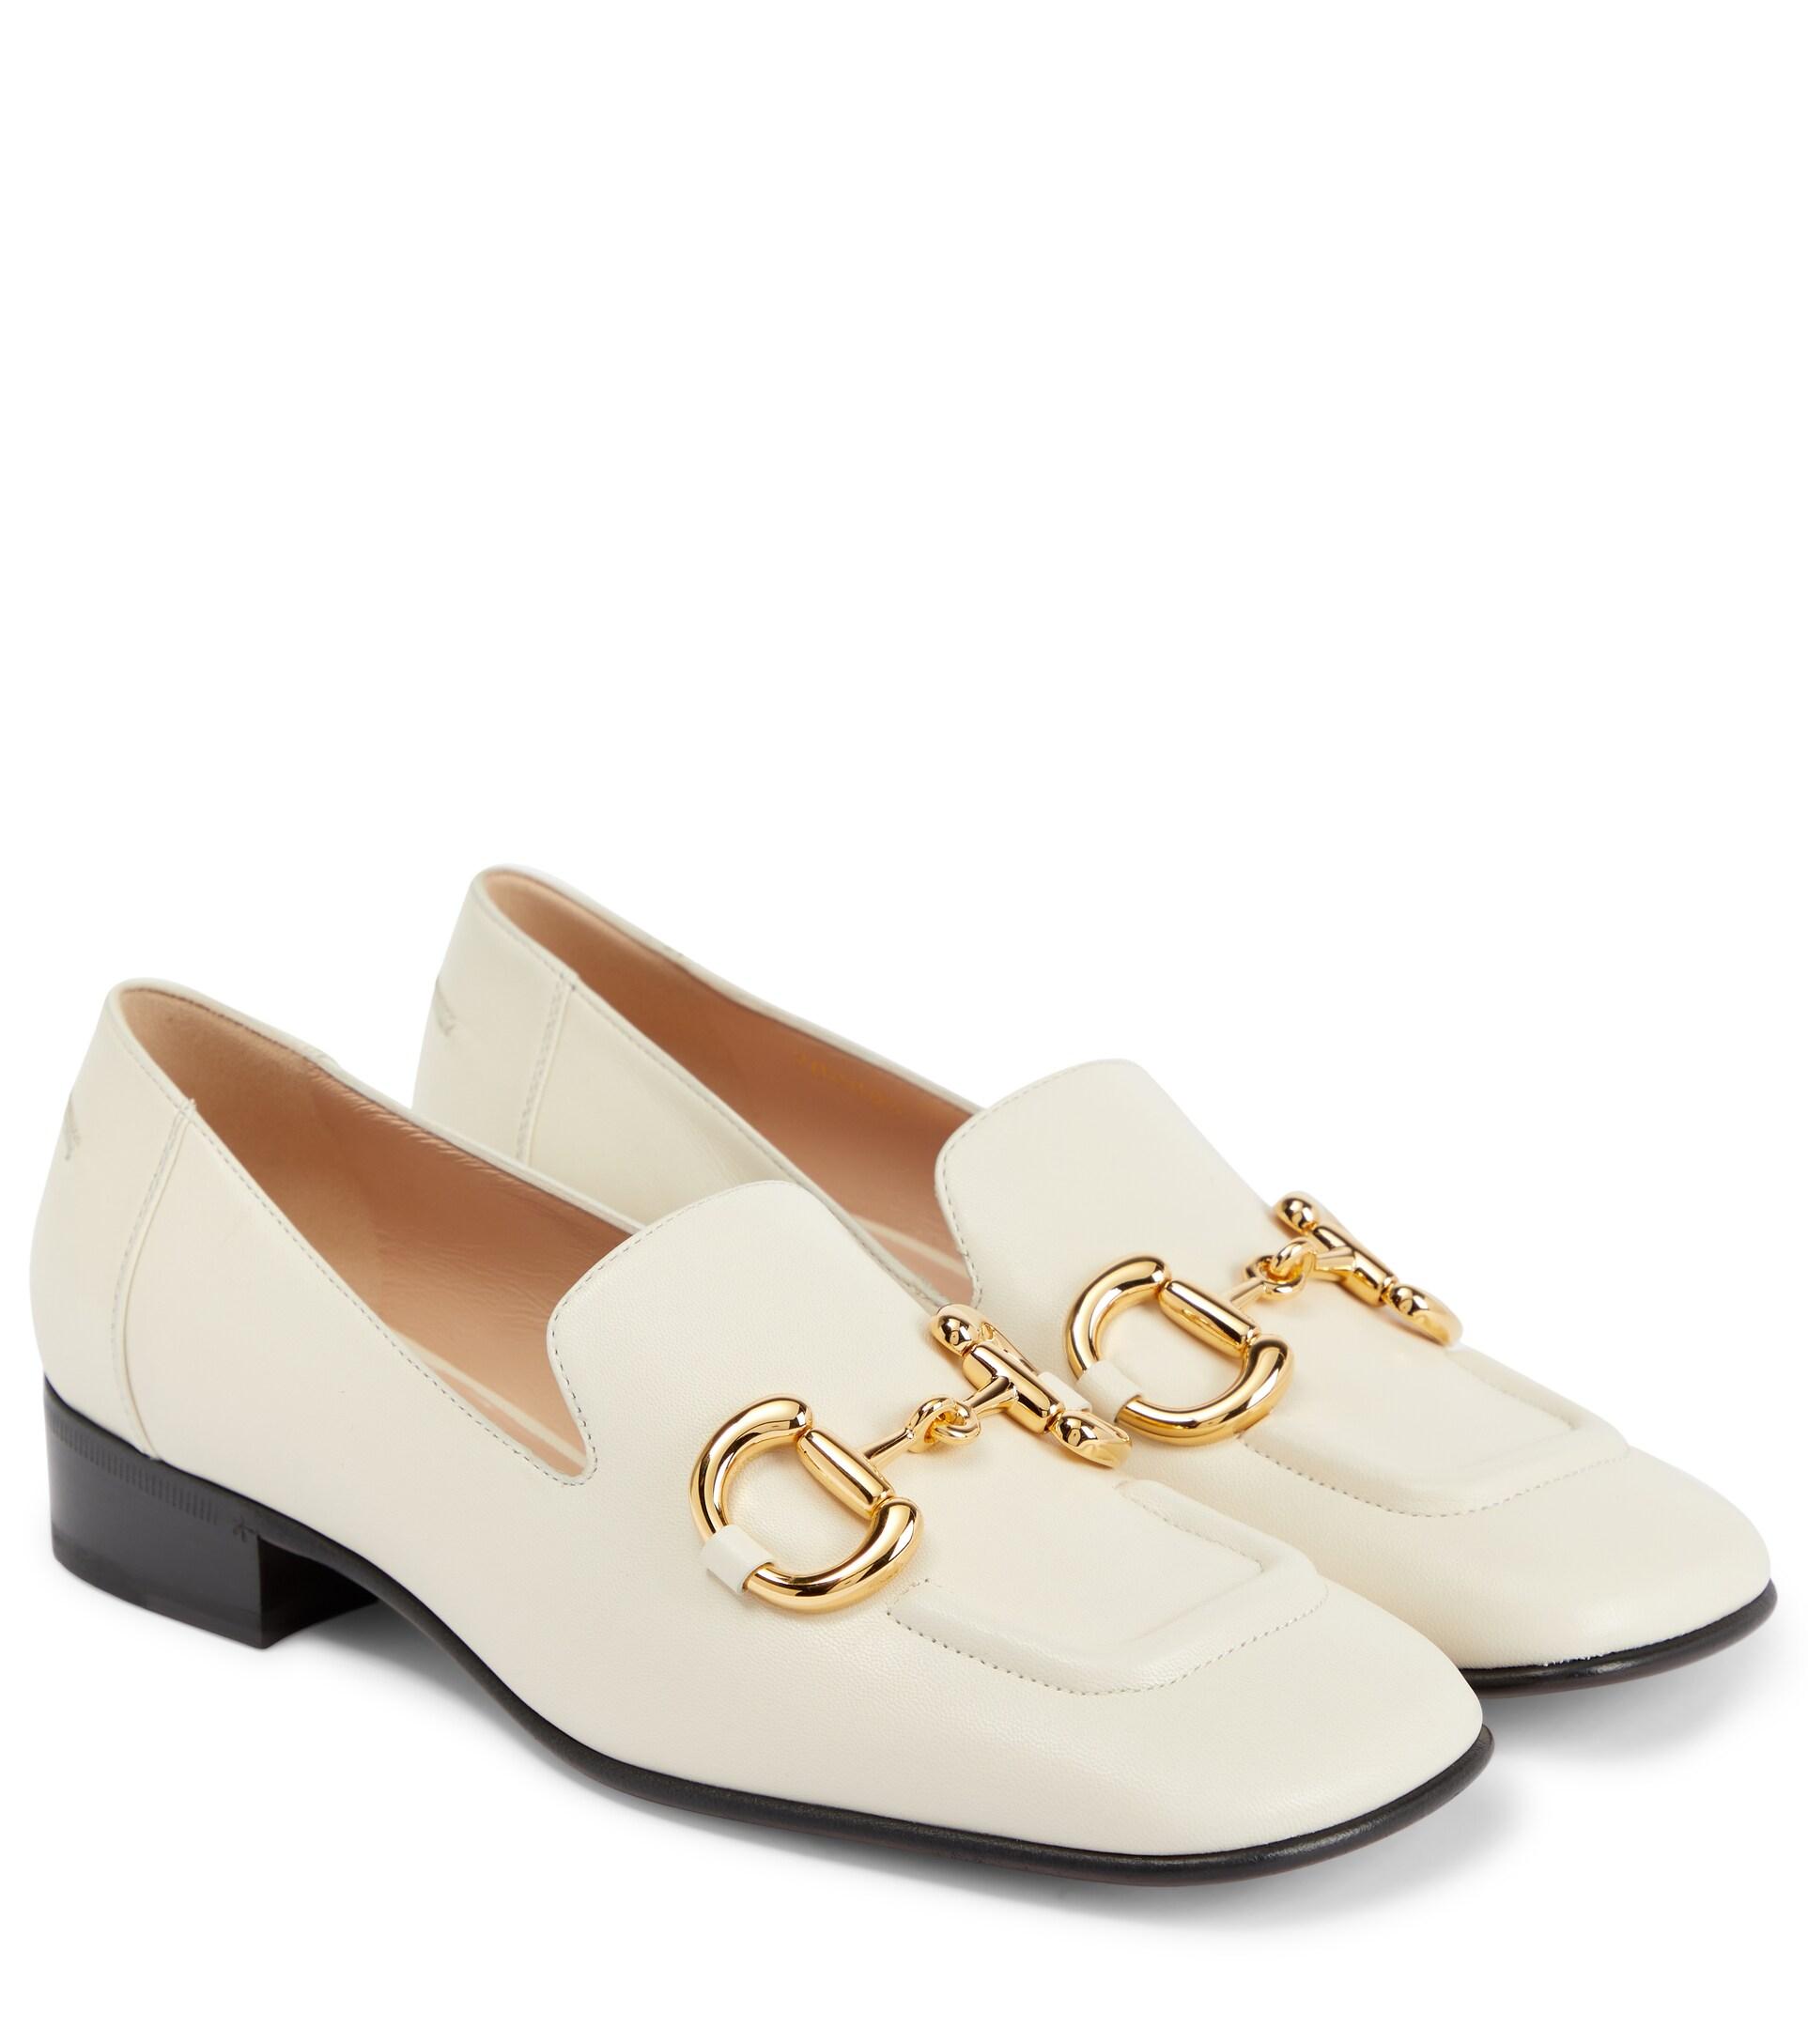 Gucci Horsebit Leather Loafers in White | Lyst